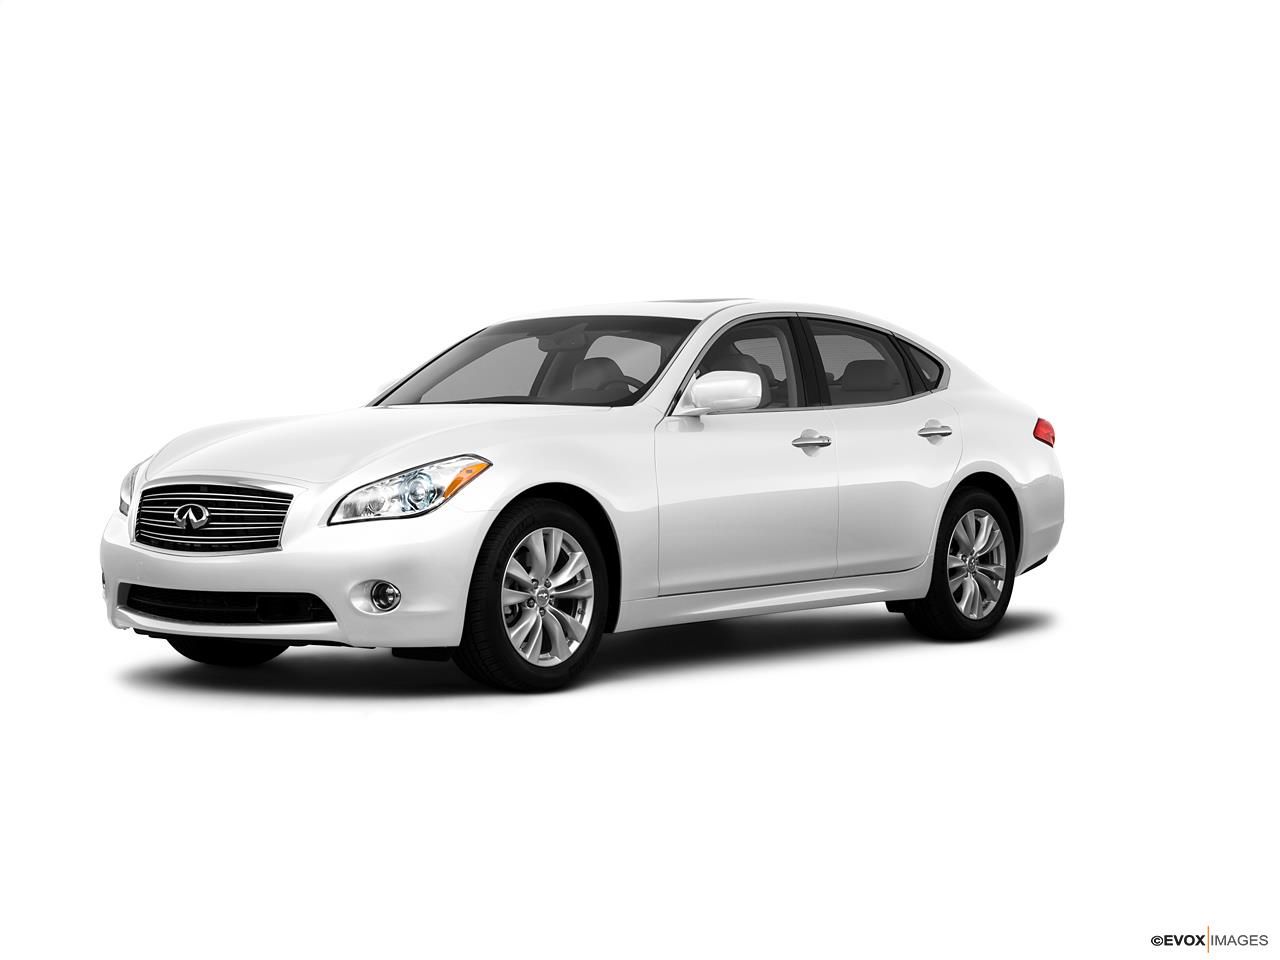 2011 Infiniti M56 Research, Photos, Specs and Expertise | CarMax